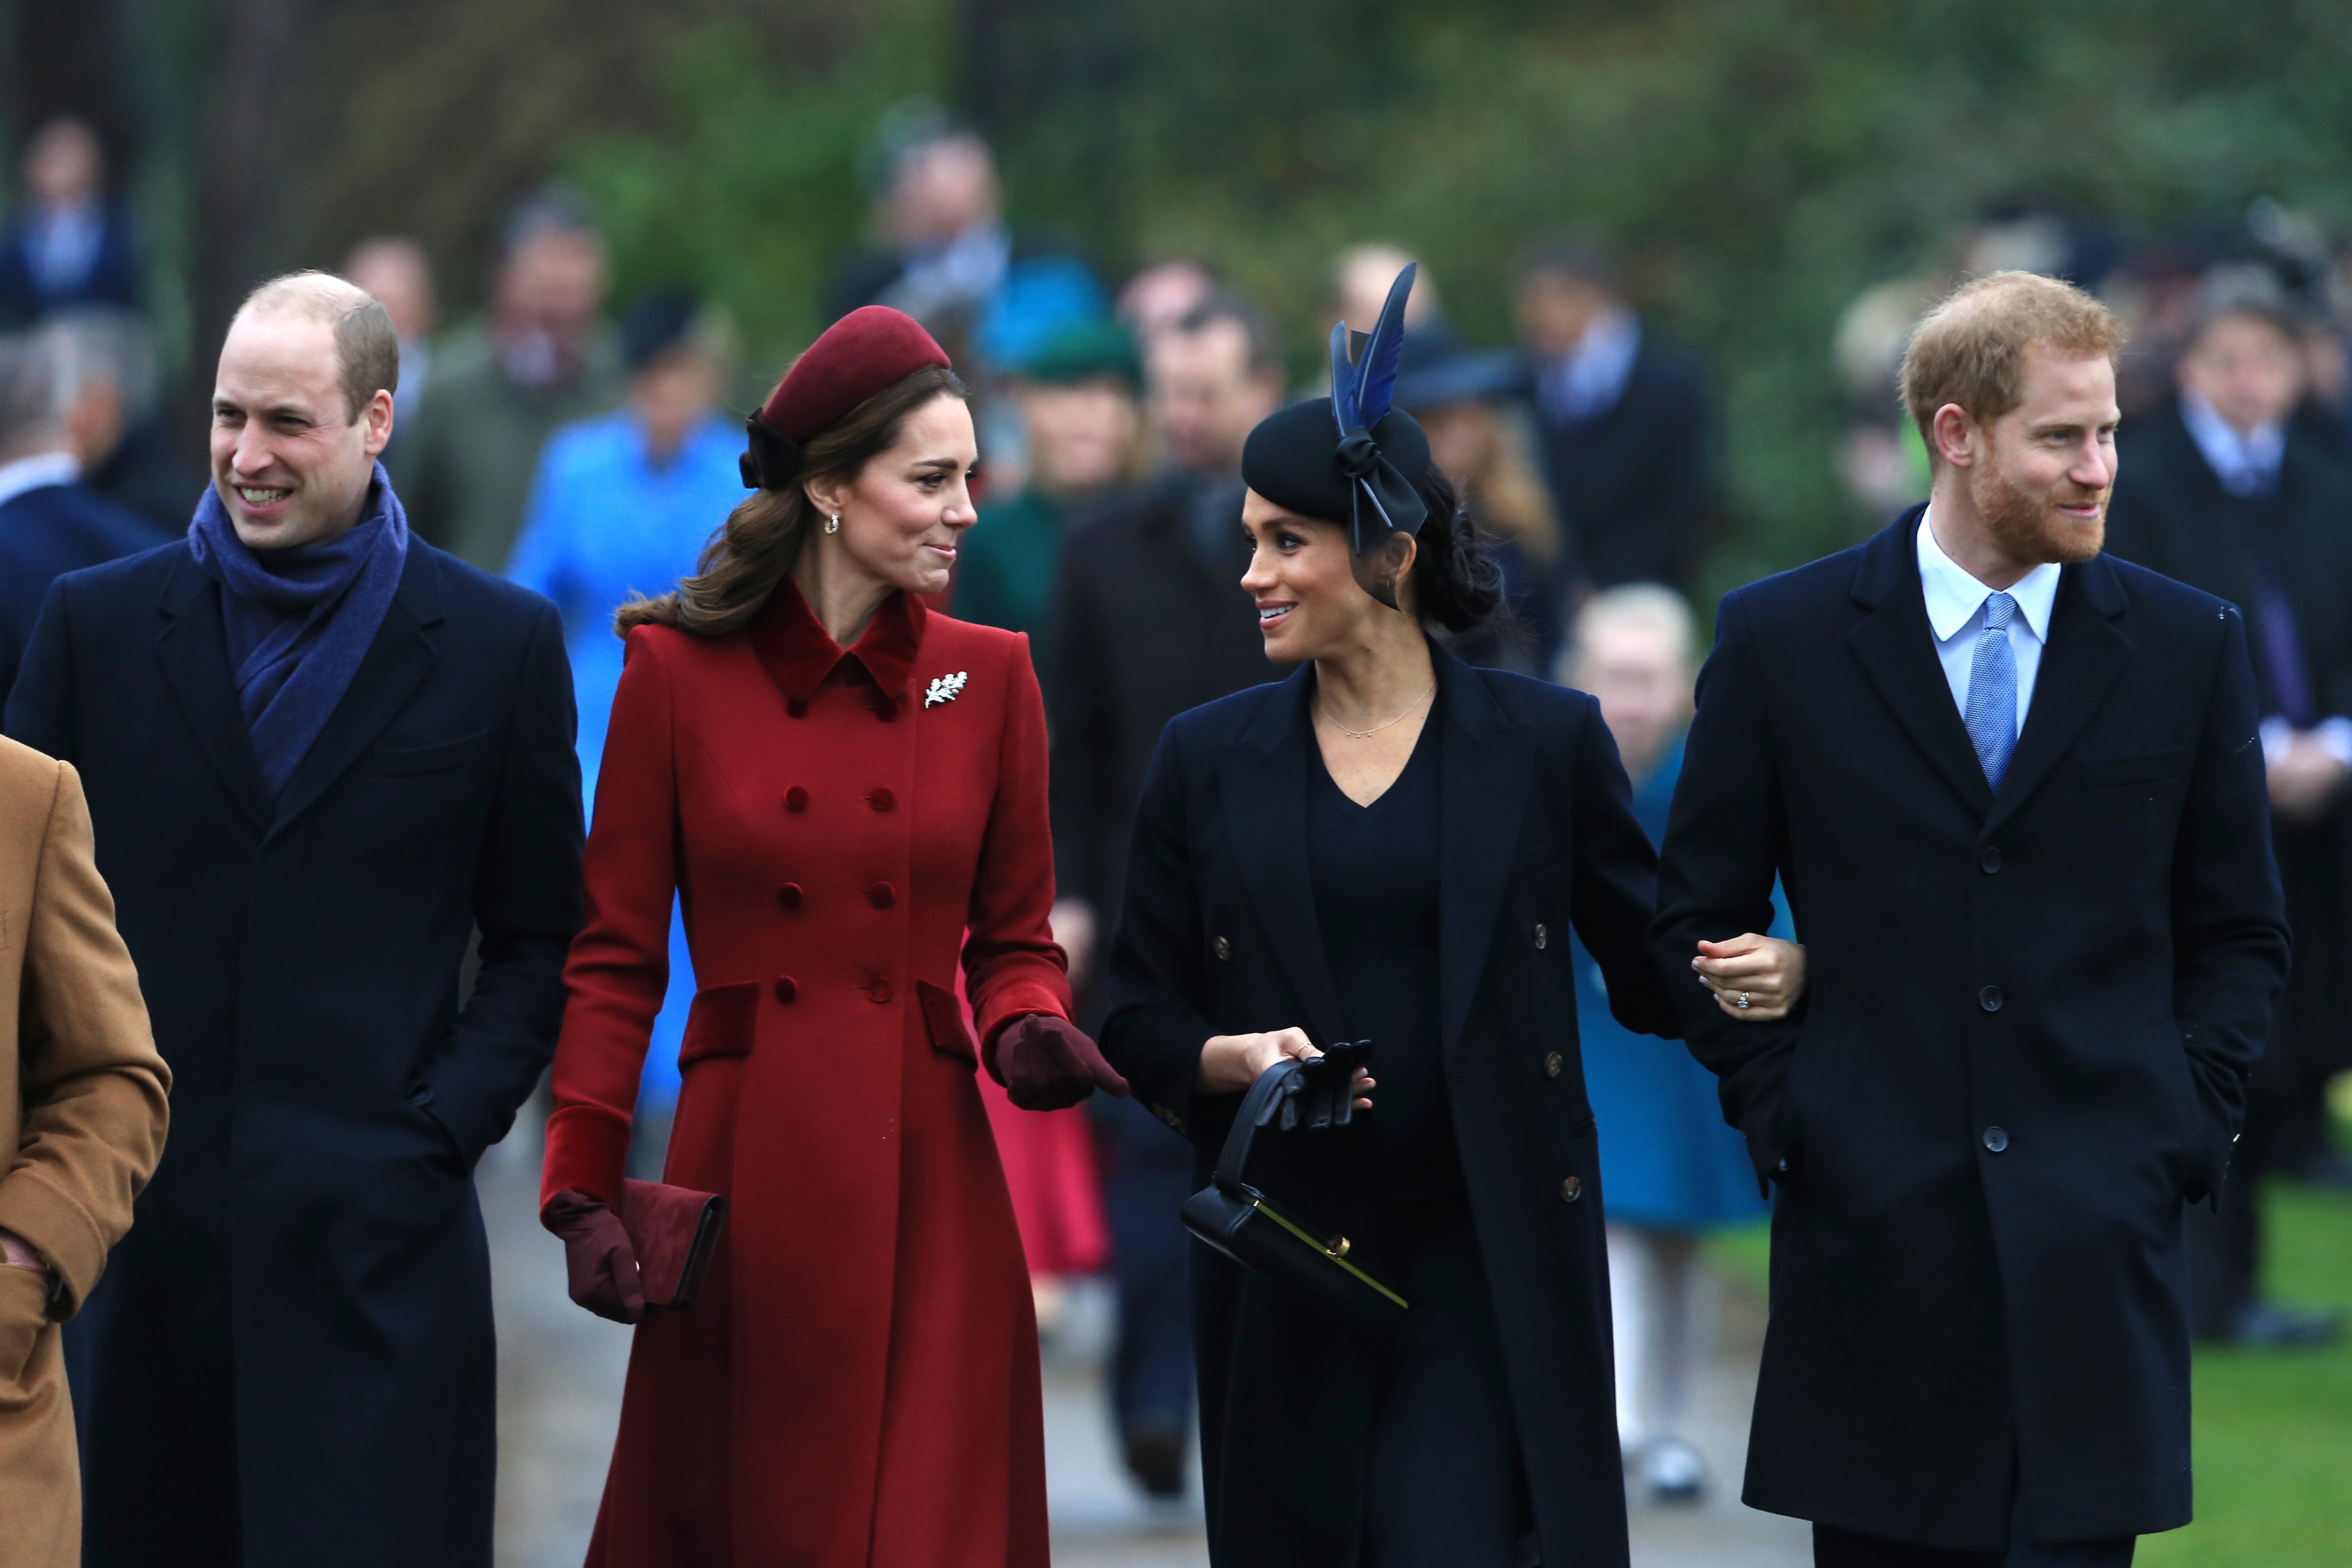 Prince William, Kate Middleton, Meghan Markle and Prince Harry arrive to attend Christmas Day Church service at Church of St Mary Magdalene on the Sandringham estate on December 25, 2018 | Photo: Getty Images